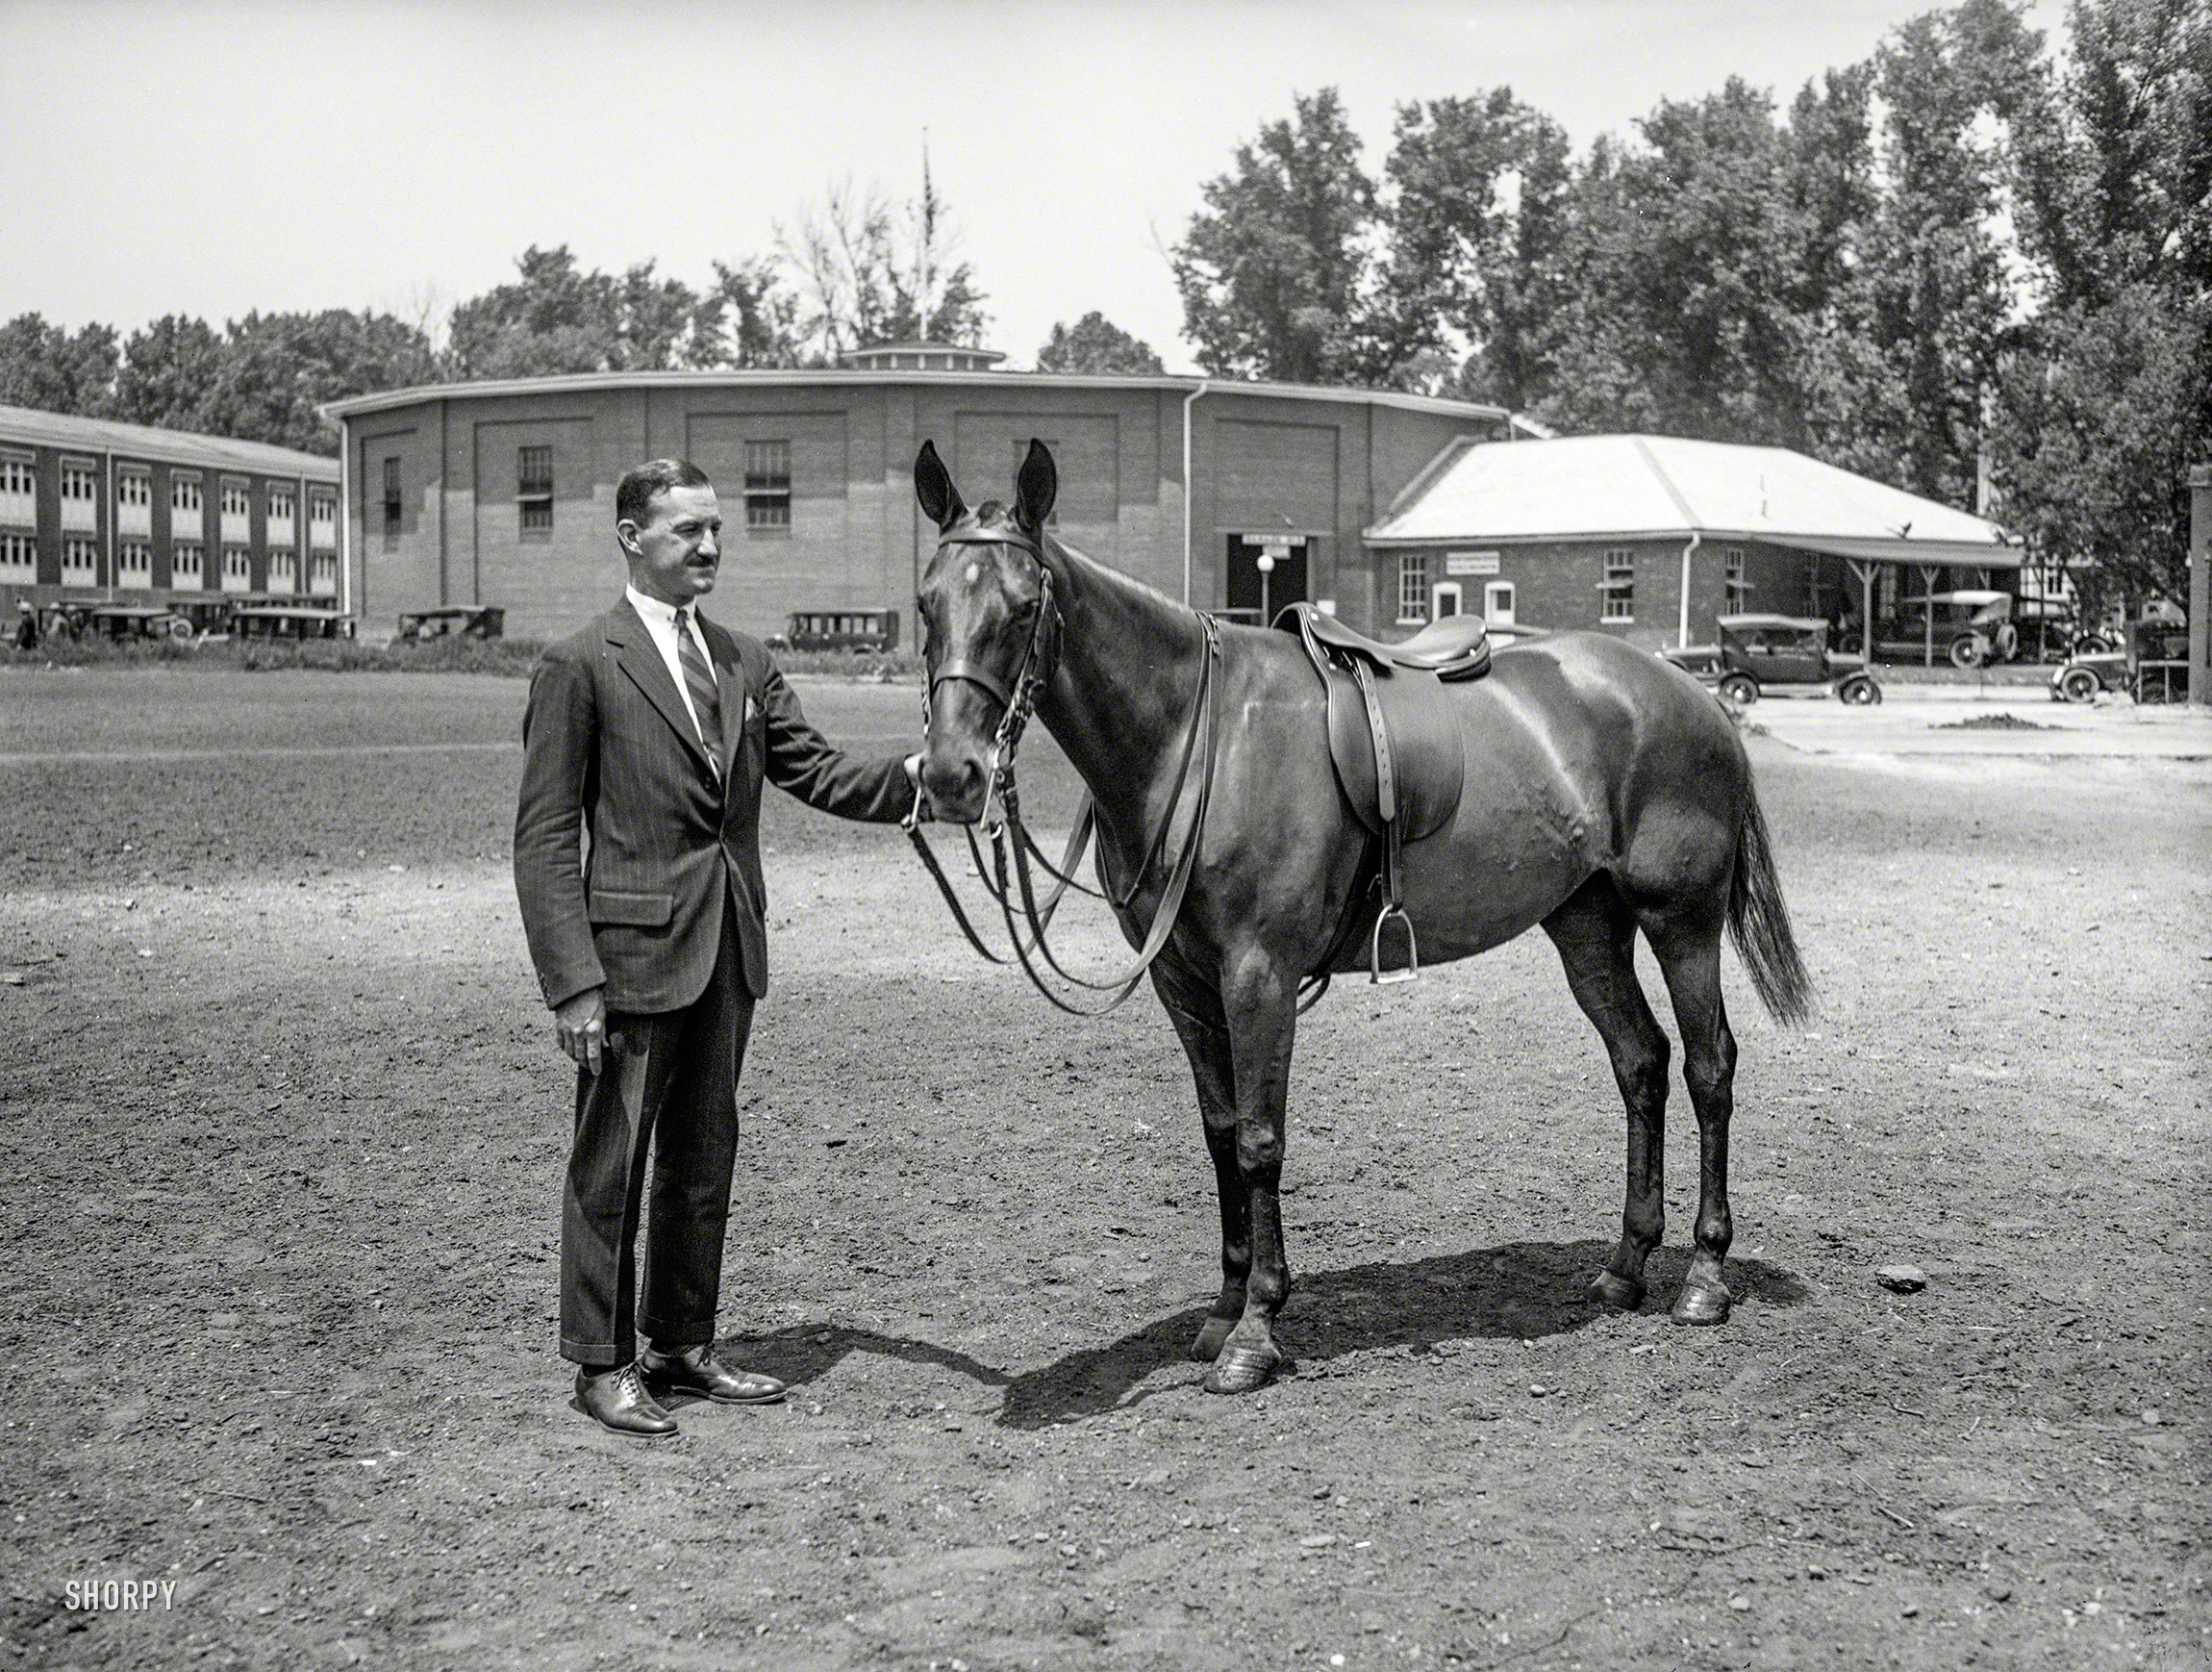 May 1925. "Major John G. Quekemeyer, formerly aide-de-camp to General Pershing, with 'Argentina,' a 6-year-old Polo pony given to him by the Minister of War of the Argentine Republic, General Justo. The General presented six ponies while he was in South America." Harris & Ewing glass negative. View full size.